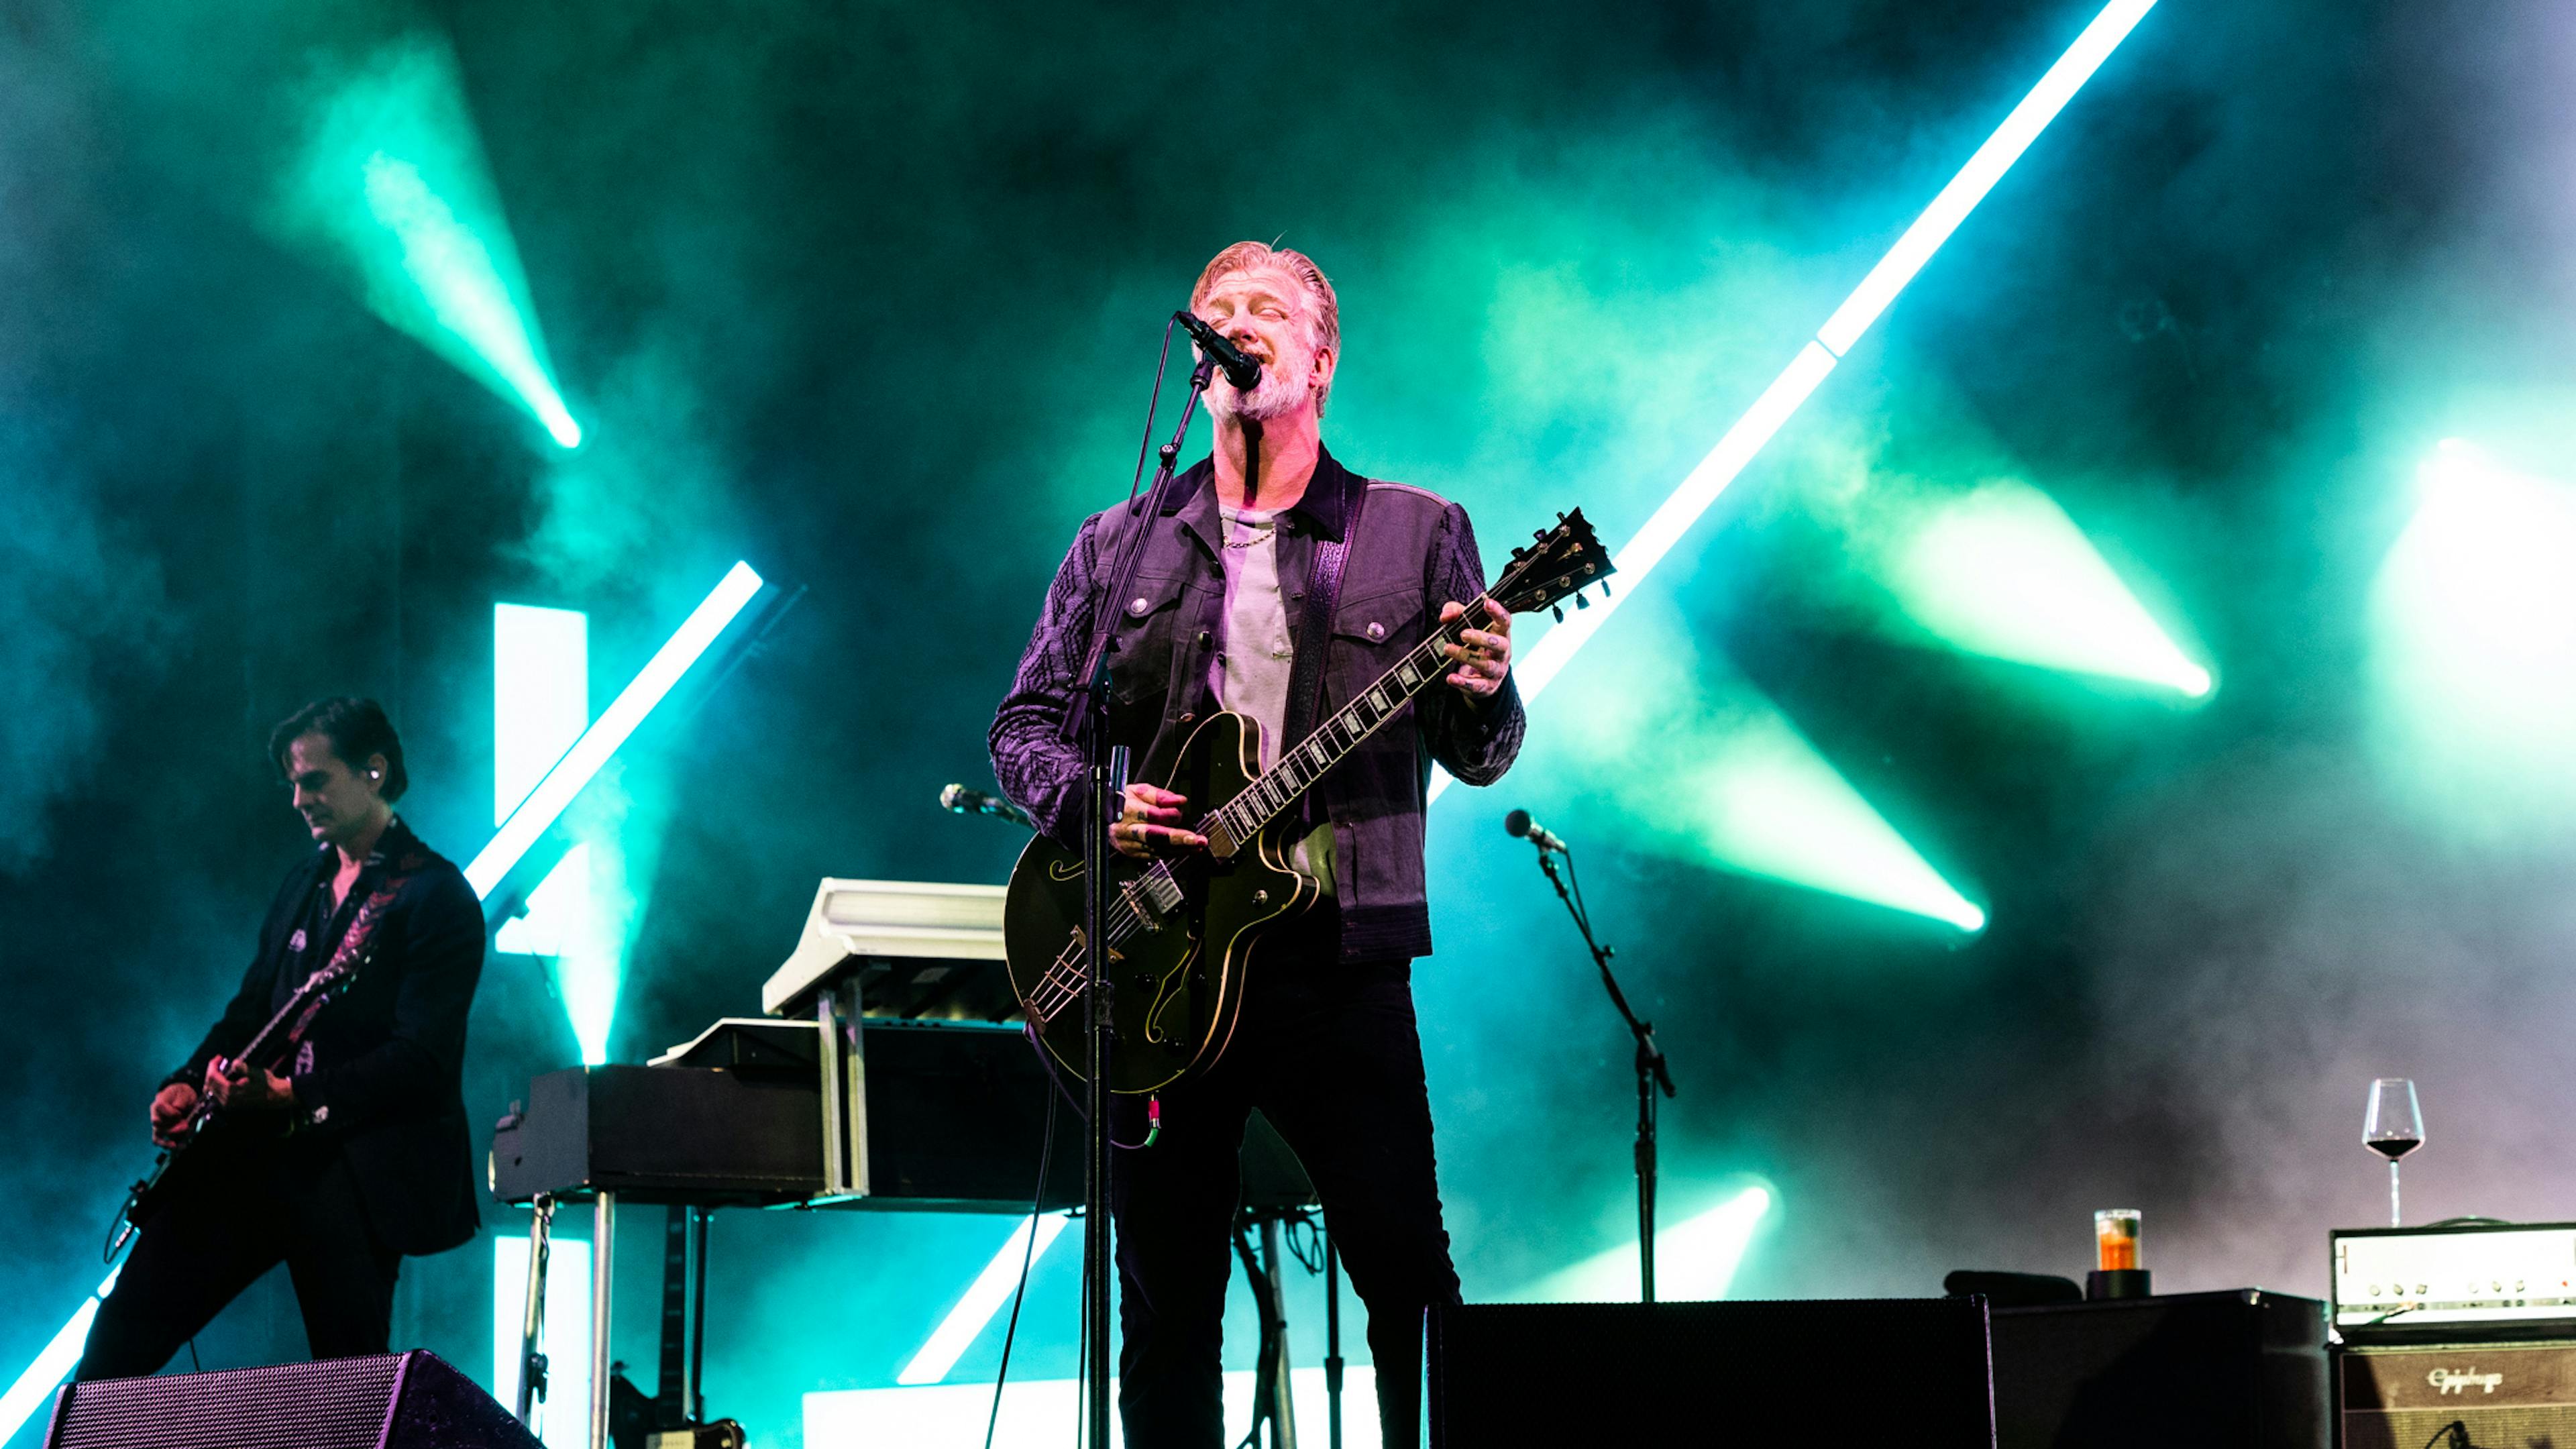 Josh Homme confirms QOTSA will be the first band ever to play the Catacombs of Paris